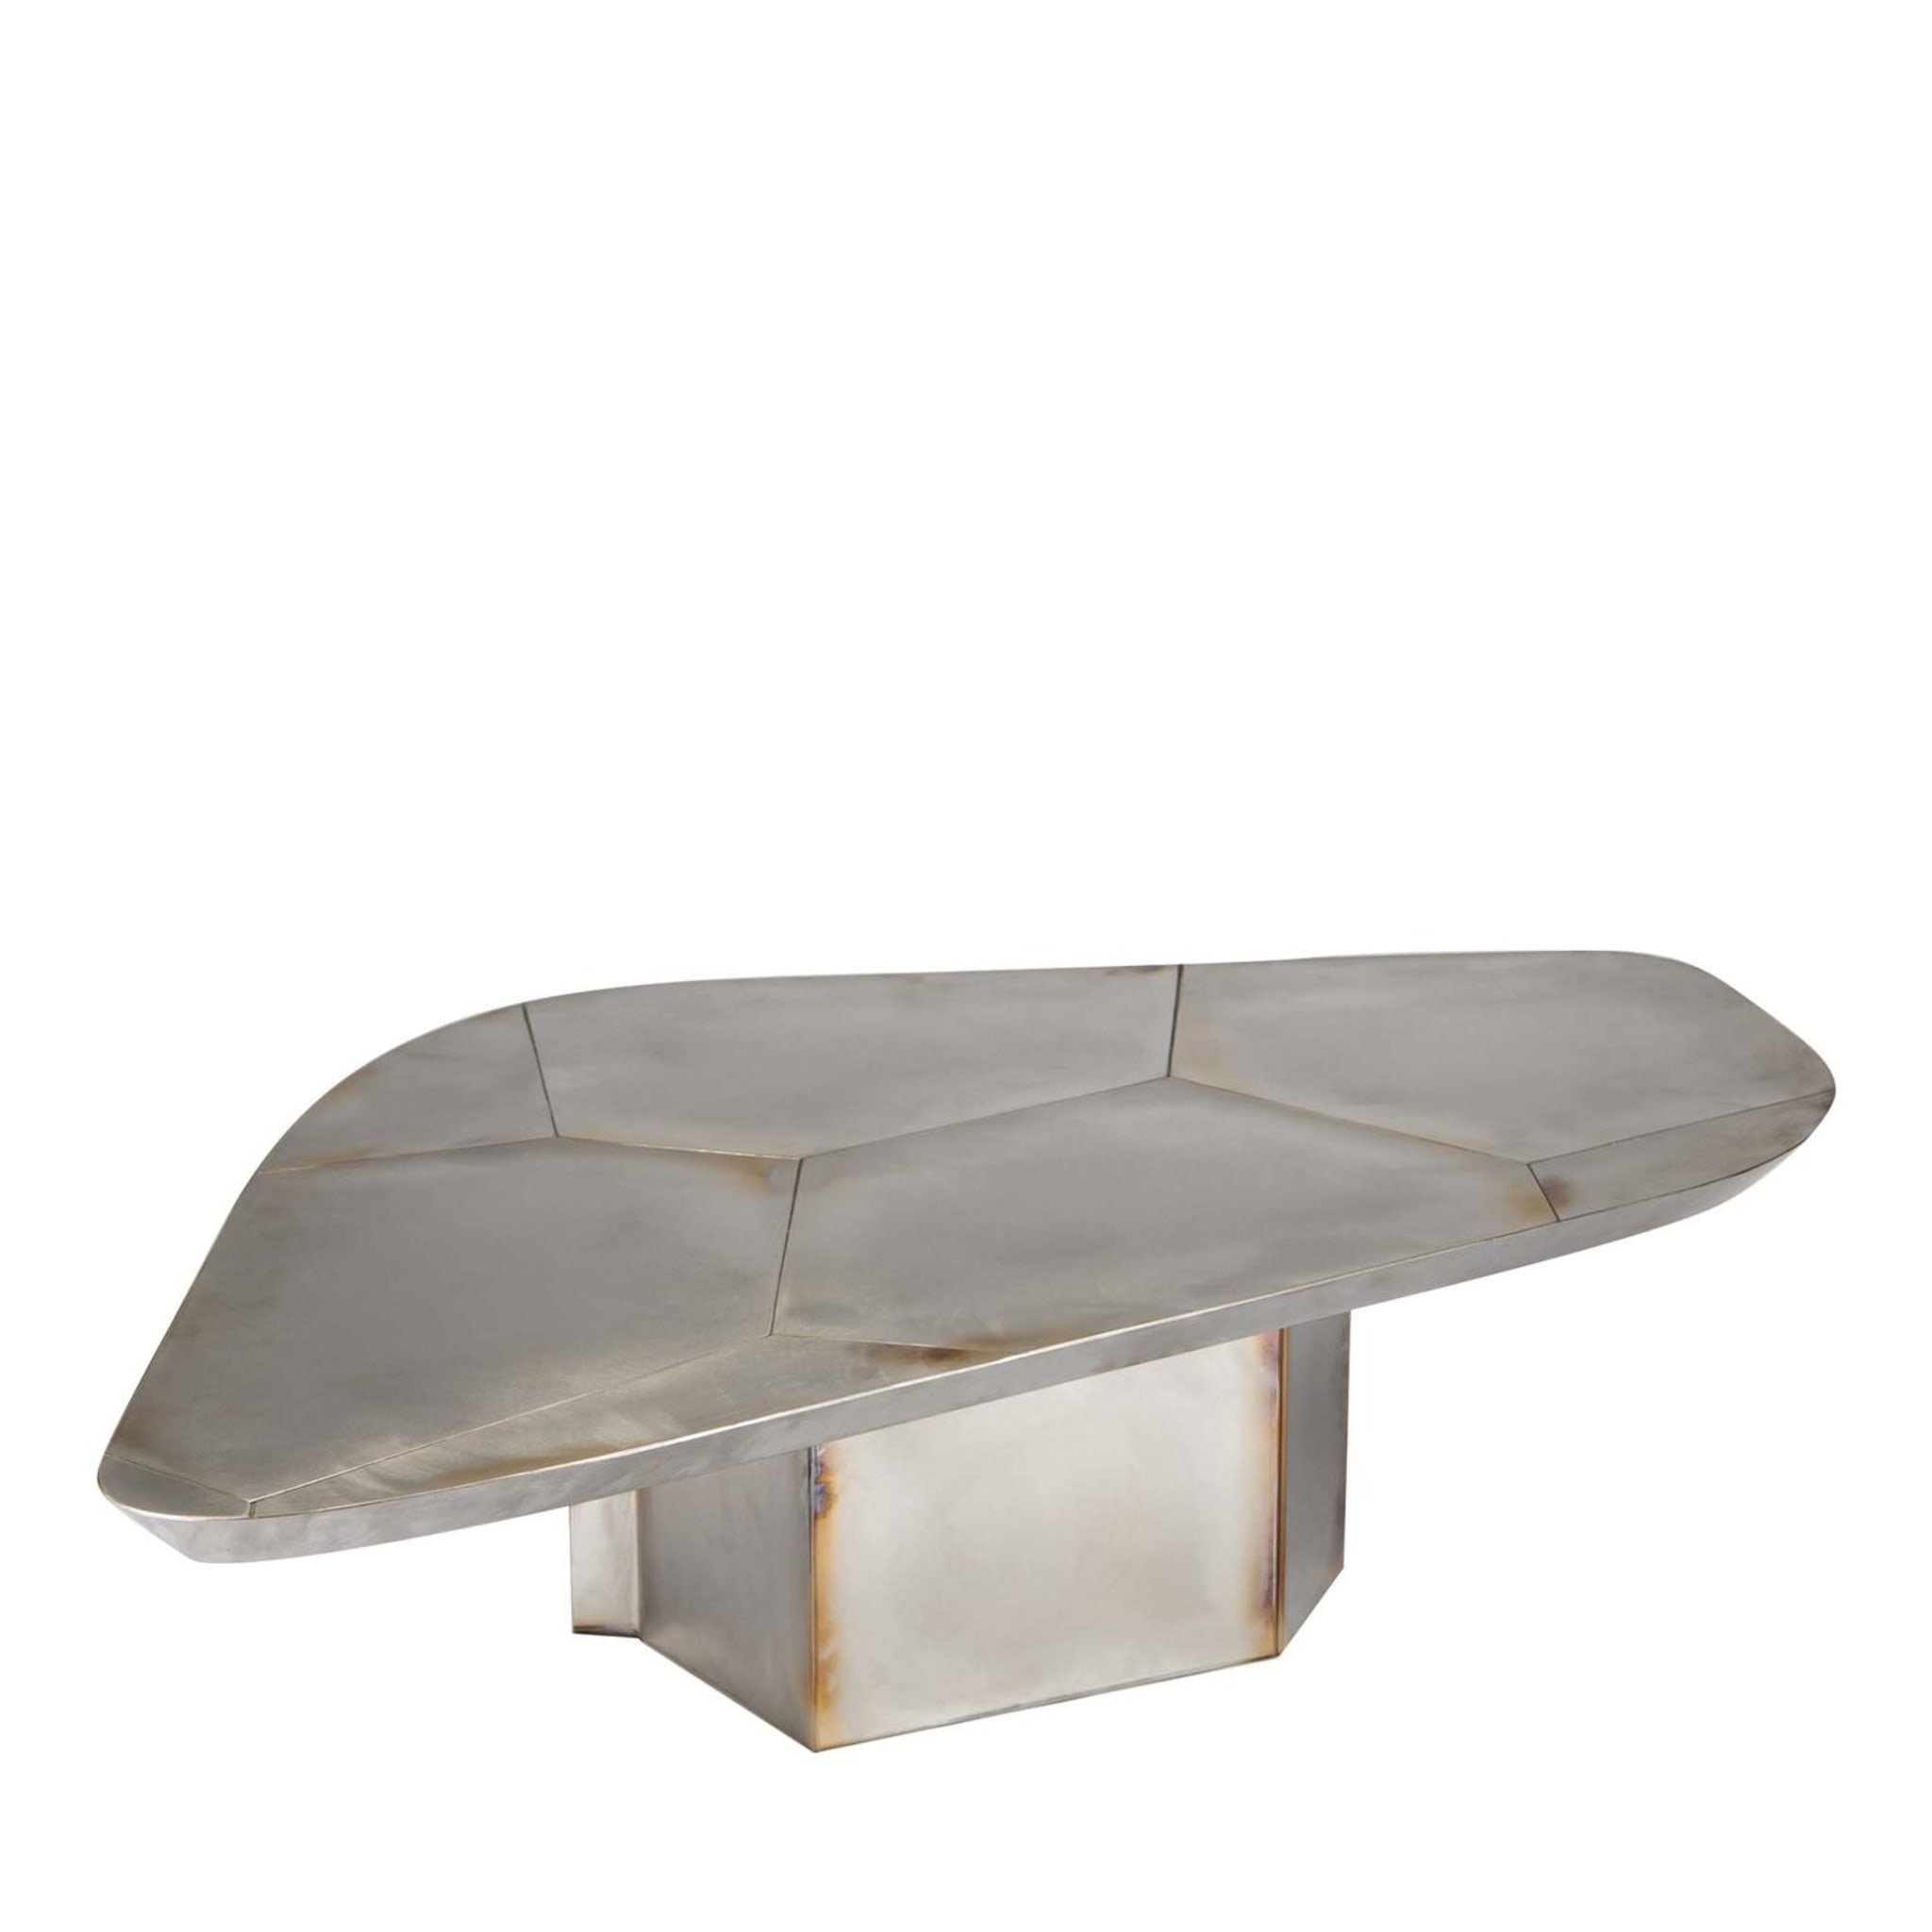 Thinking Klein Steel Coffee Table - Main view